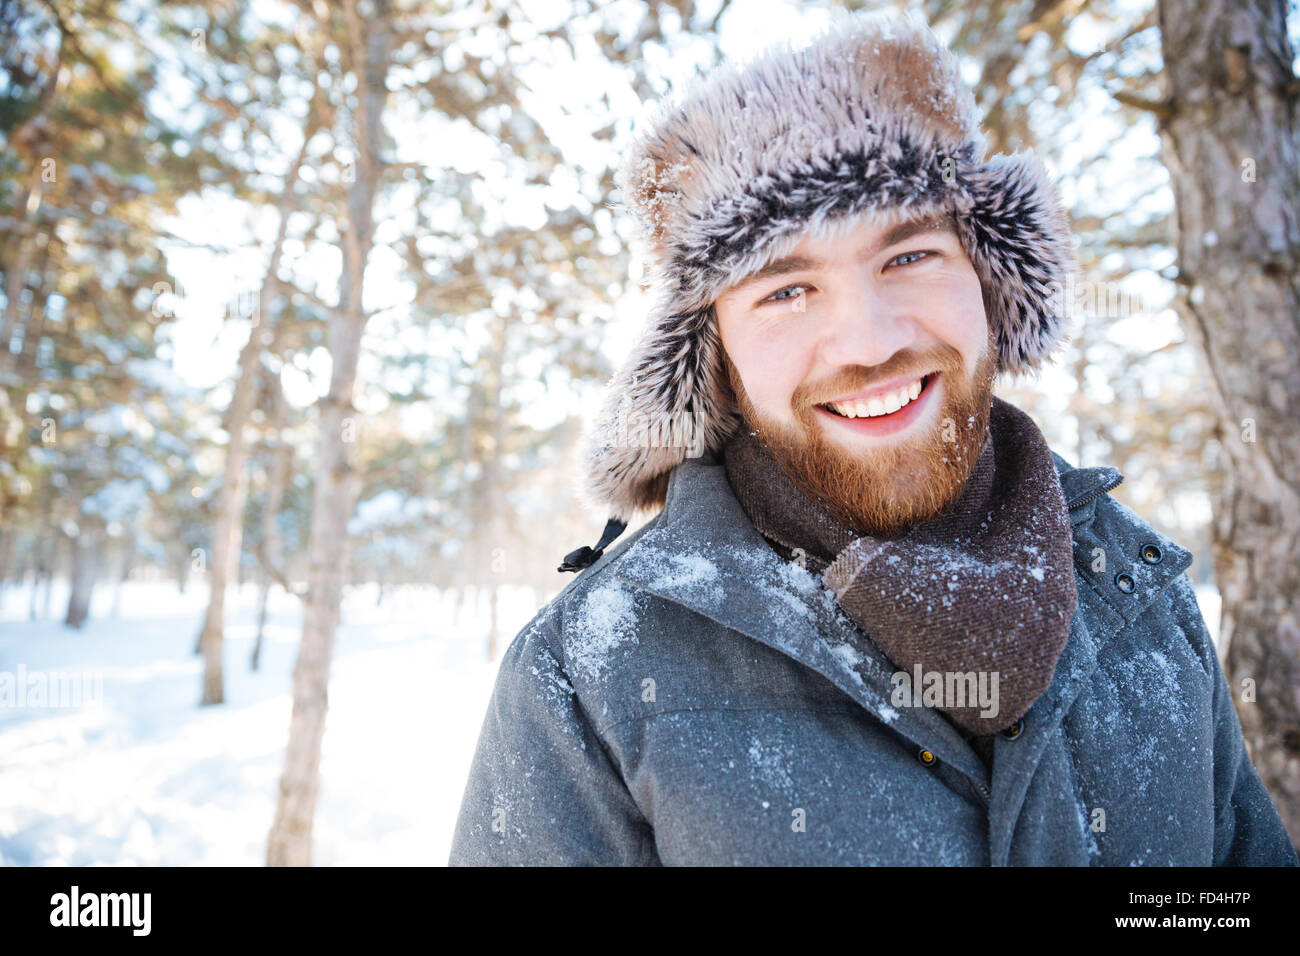 Happy young man looking at camera in winter ark Stock Photo